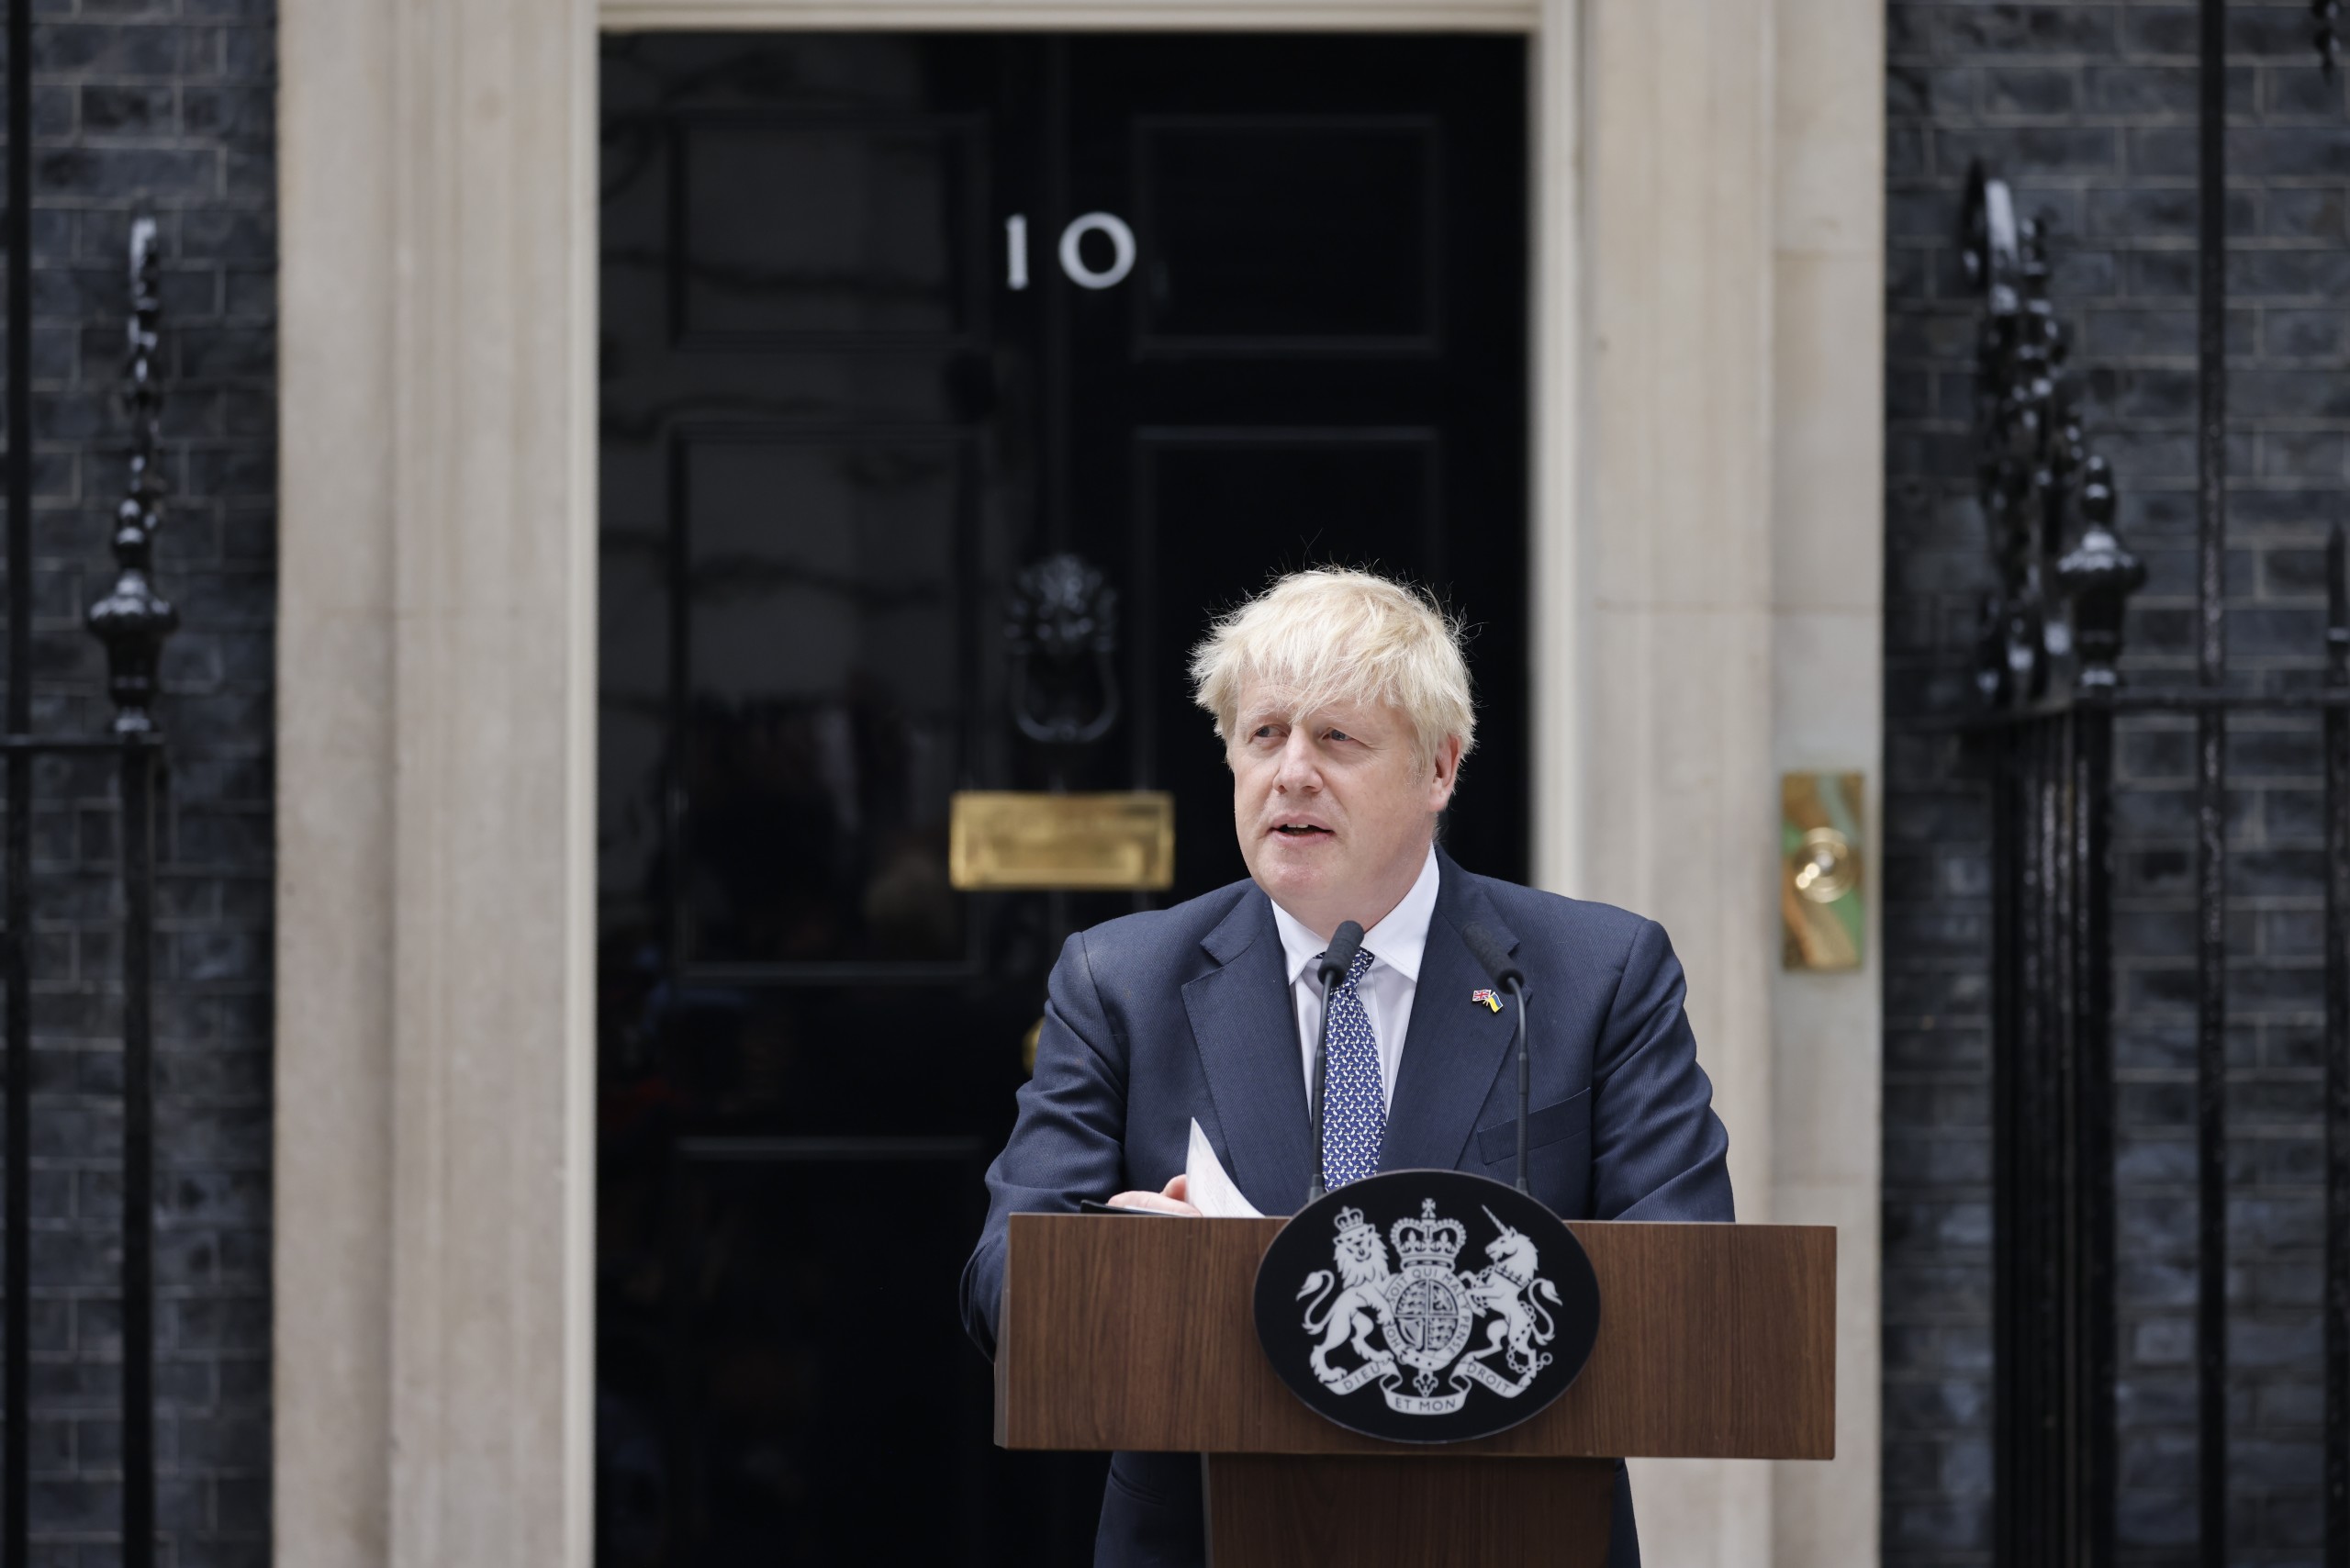 epa10056729 British Prime Minister Boris Johnson announces his resignation as leader of the Conservative Party in Downing Street, London, Britain 7 July 2022.  Johnson resigned as Tory Party leader after he lost support in his own government and party. He is expected to stay in post until a successor is elected, expected to be in the autumn.  EPA/TOLGA AKMEN